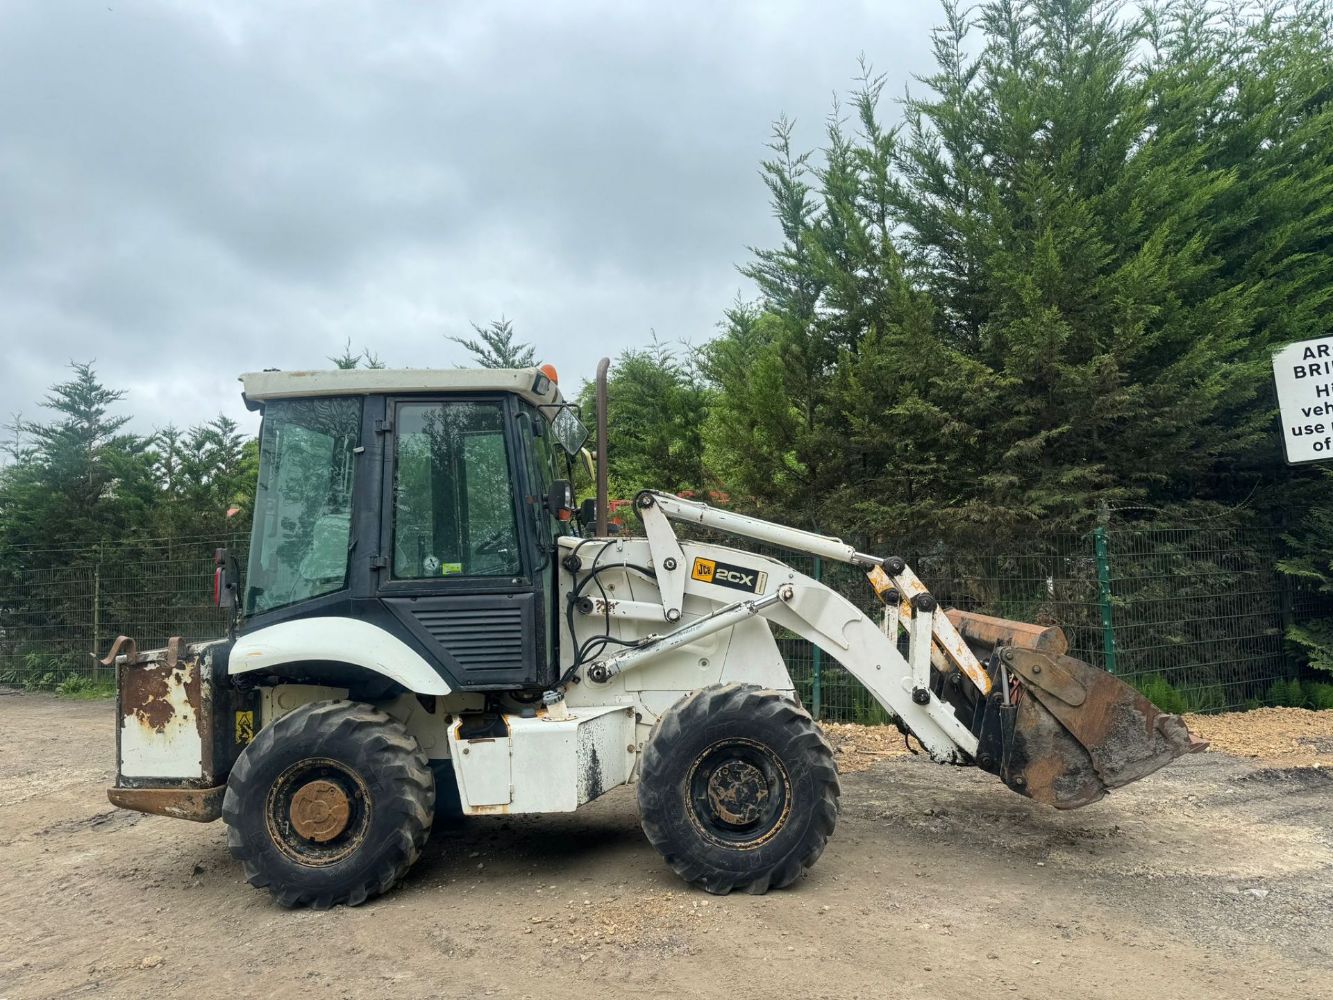 MONDAY 8PM! JCB 2CX, 2019 NISSAN NAVARA 190 4WD, MANITOU, TEREX, BOMAG, PLYMOUTH PROWLER, EV VEHICLES, TRACTORS, MOWERS, VANS & MUCH MORE!